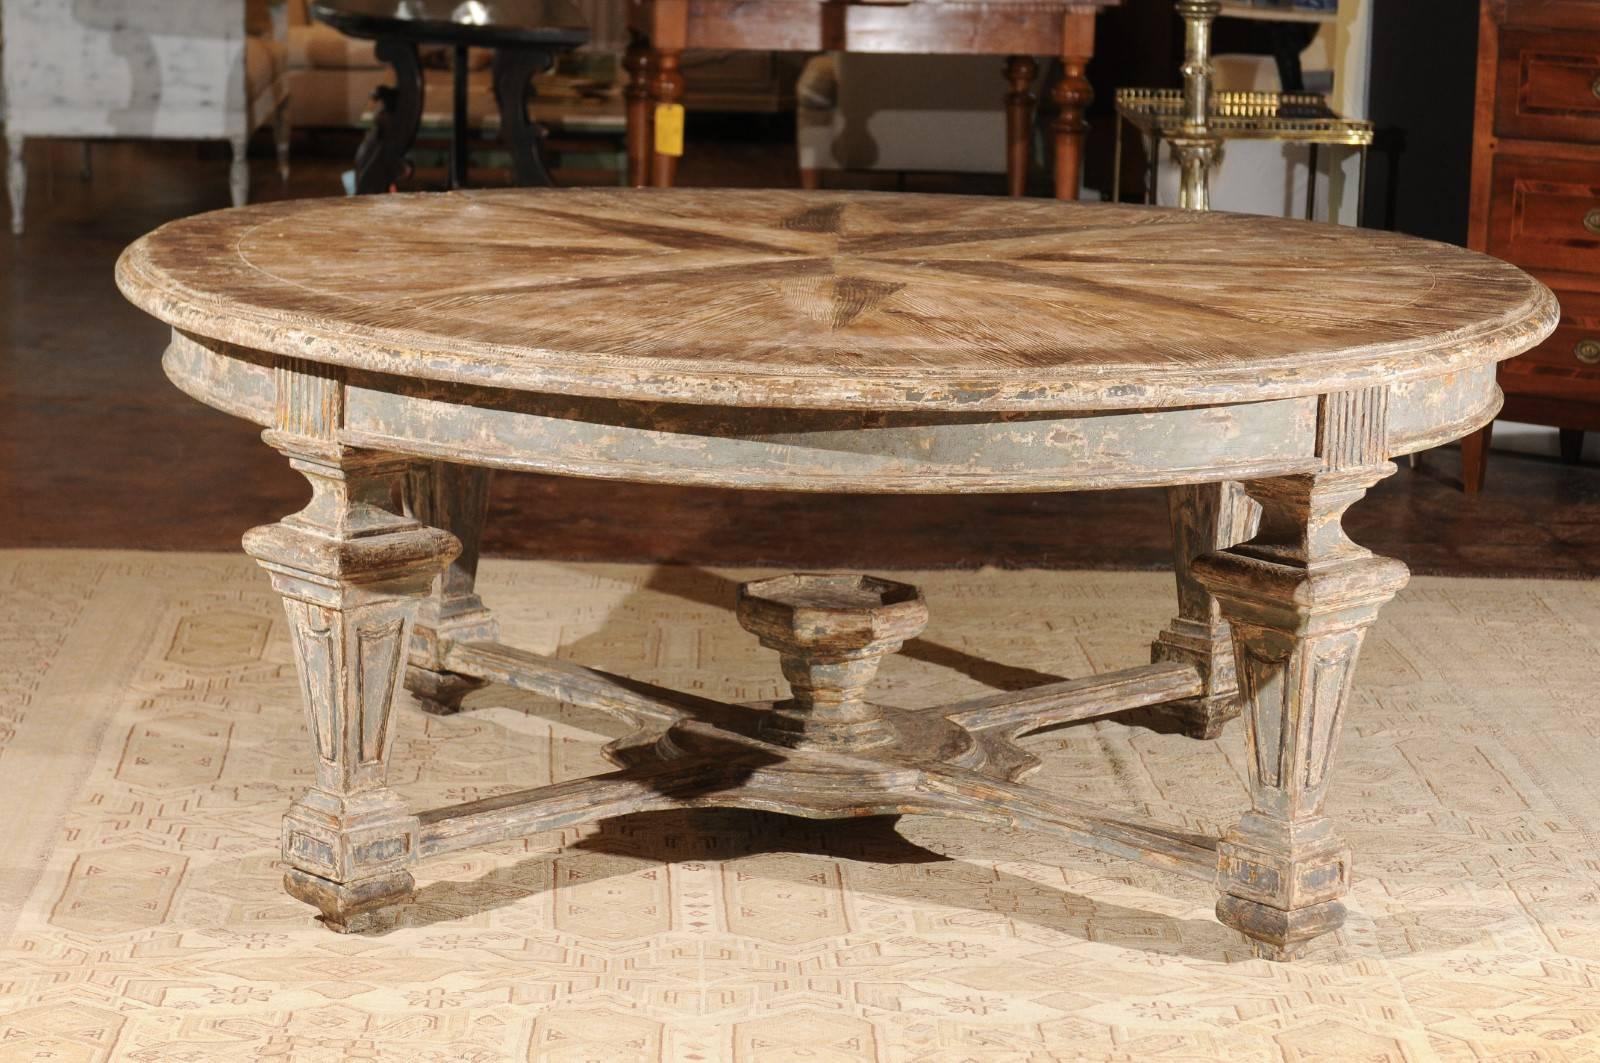 An Italian neoclassical style handmade wooden round dining table with star-inlaid top, column legs and cross stretcher. Handmade in Italy, this exquisite dining table features a circular top, beautifully inlaid with an oversized star motif, with